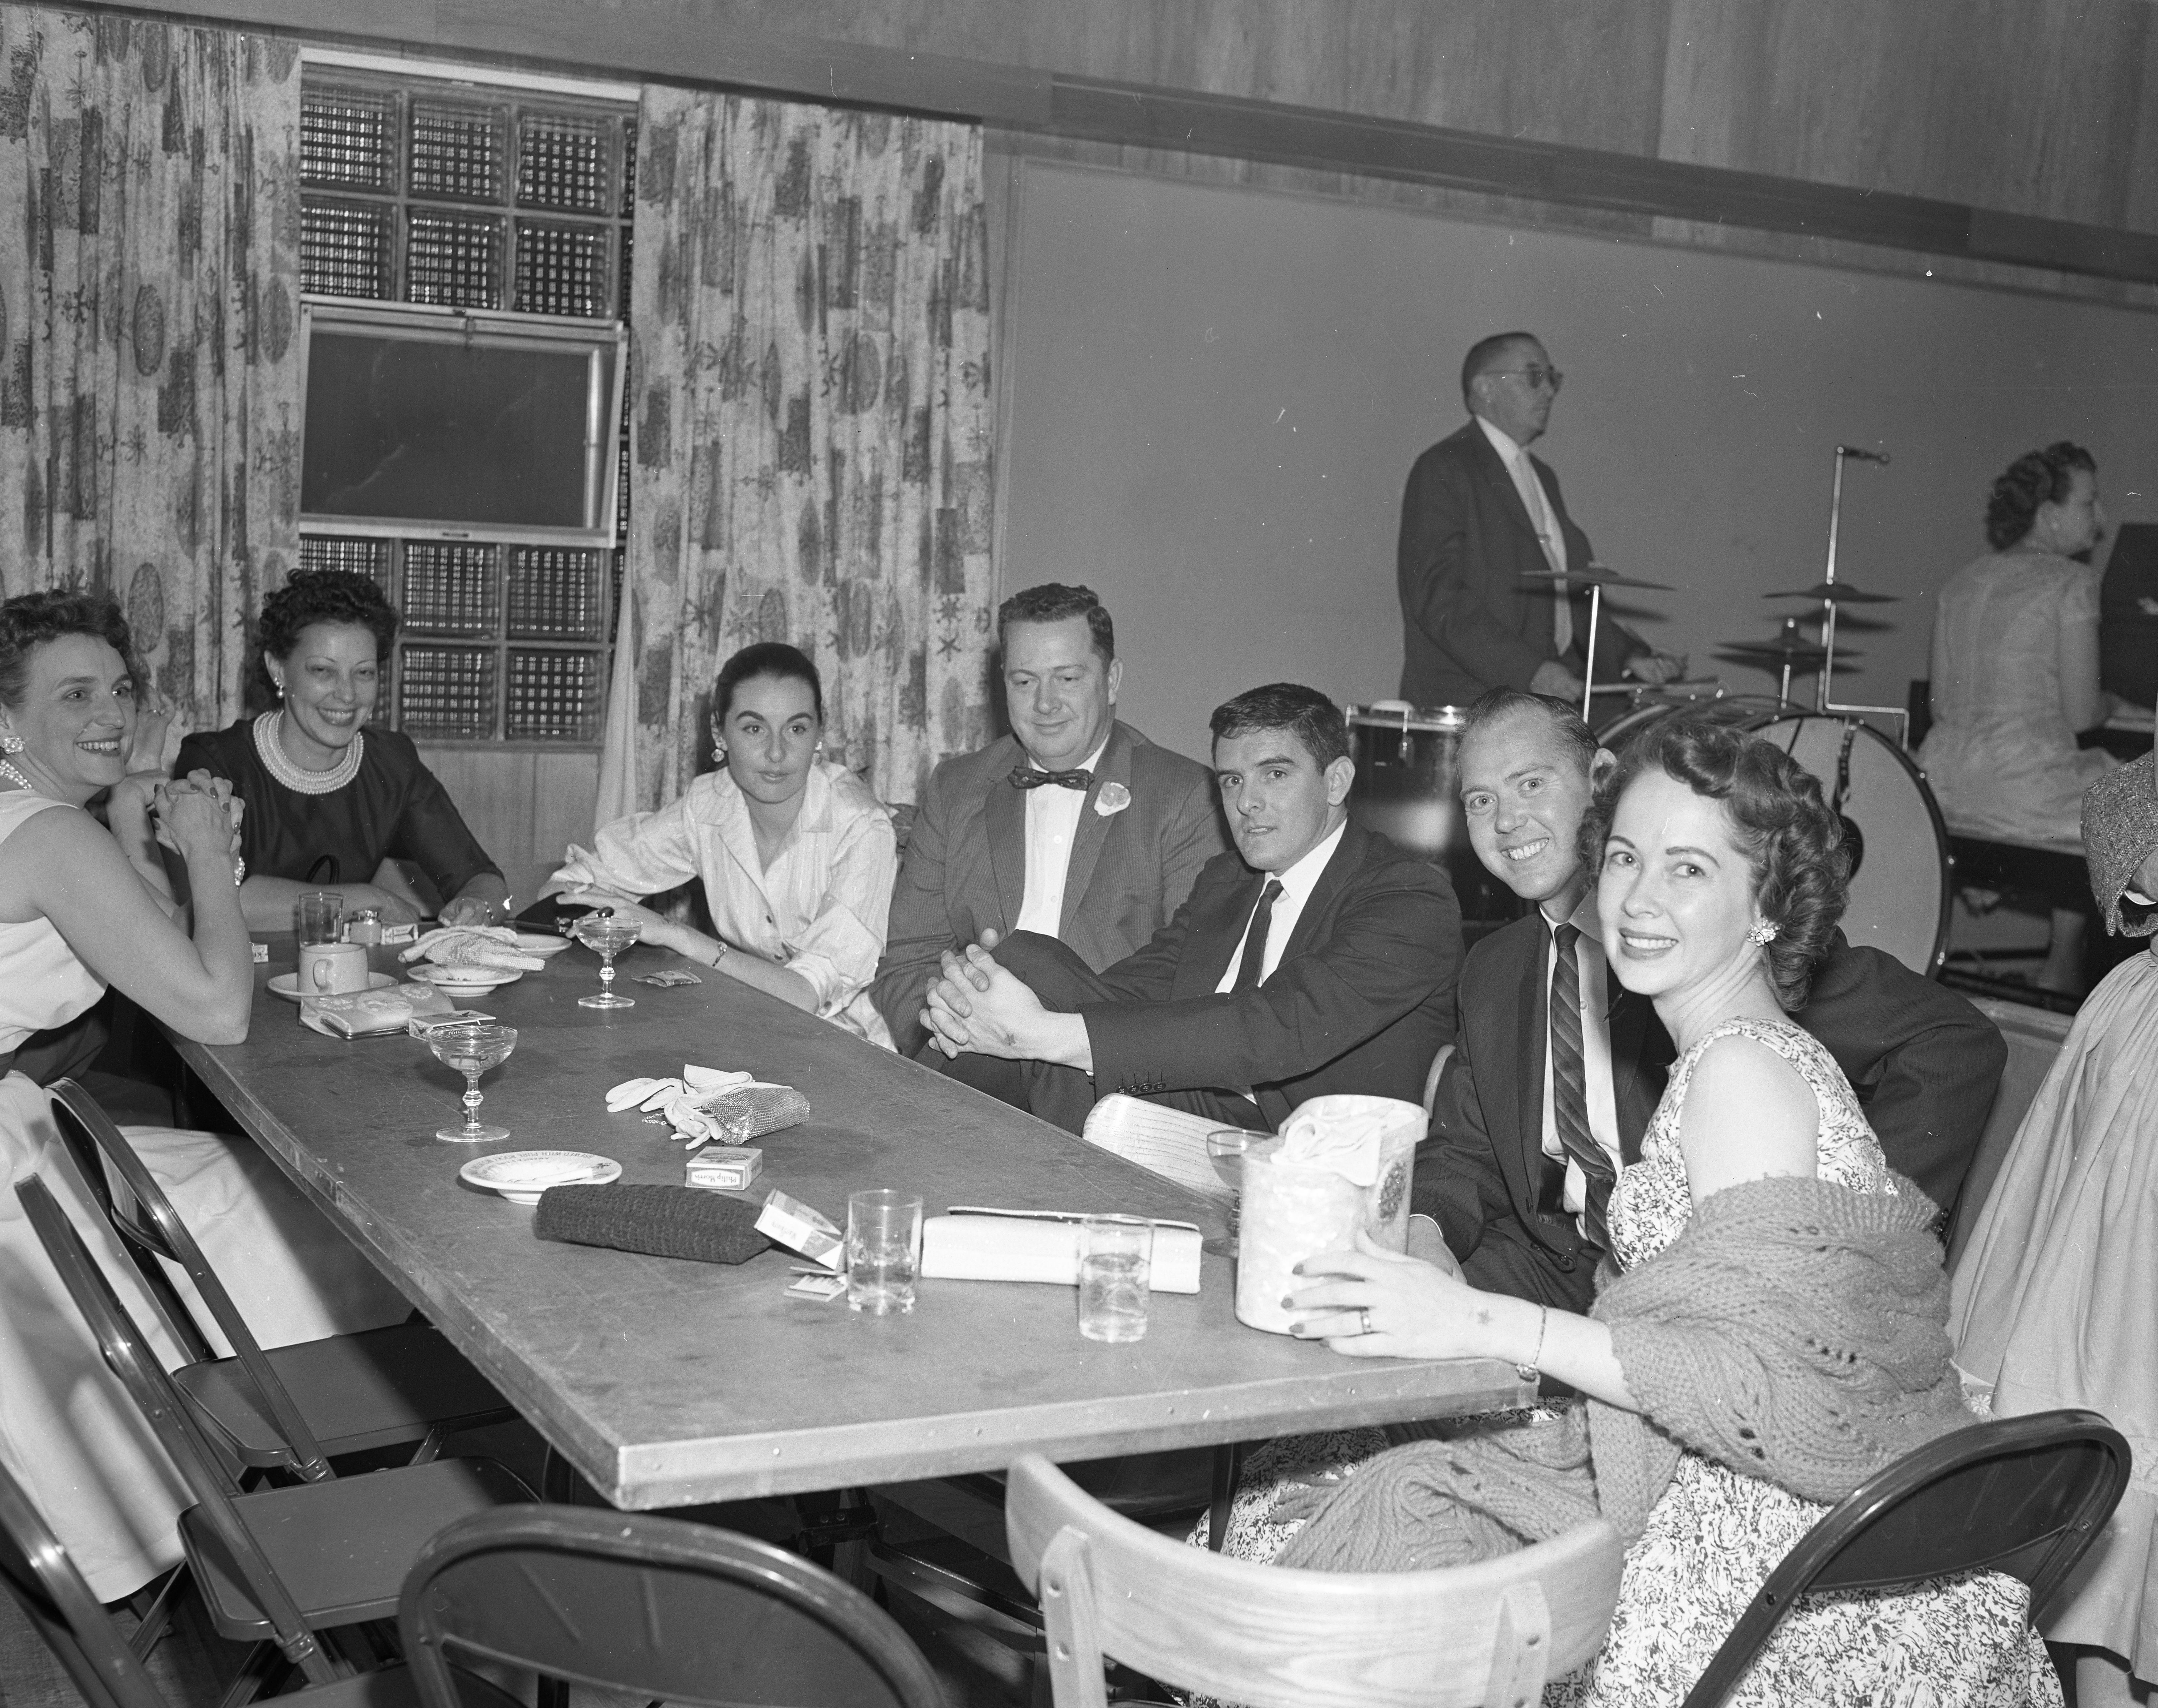 Convair employees and others seated together at the dance.